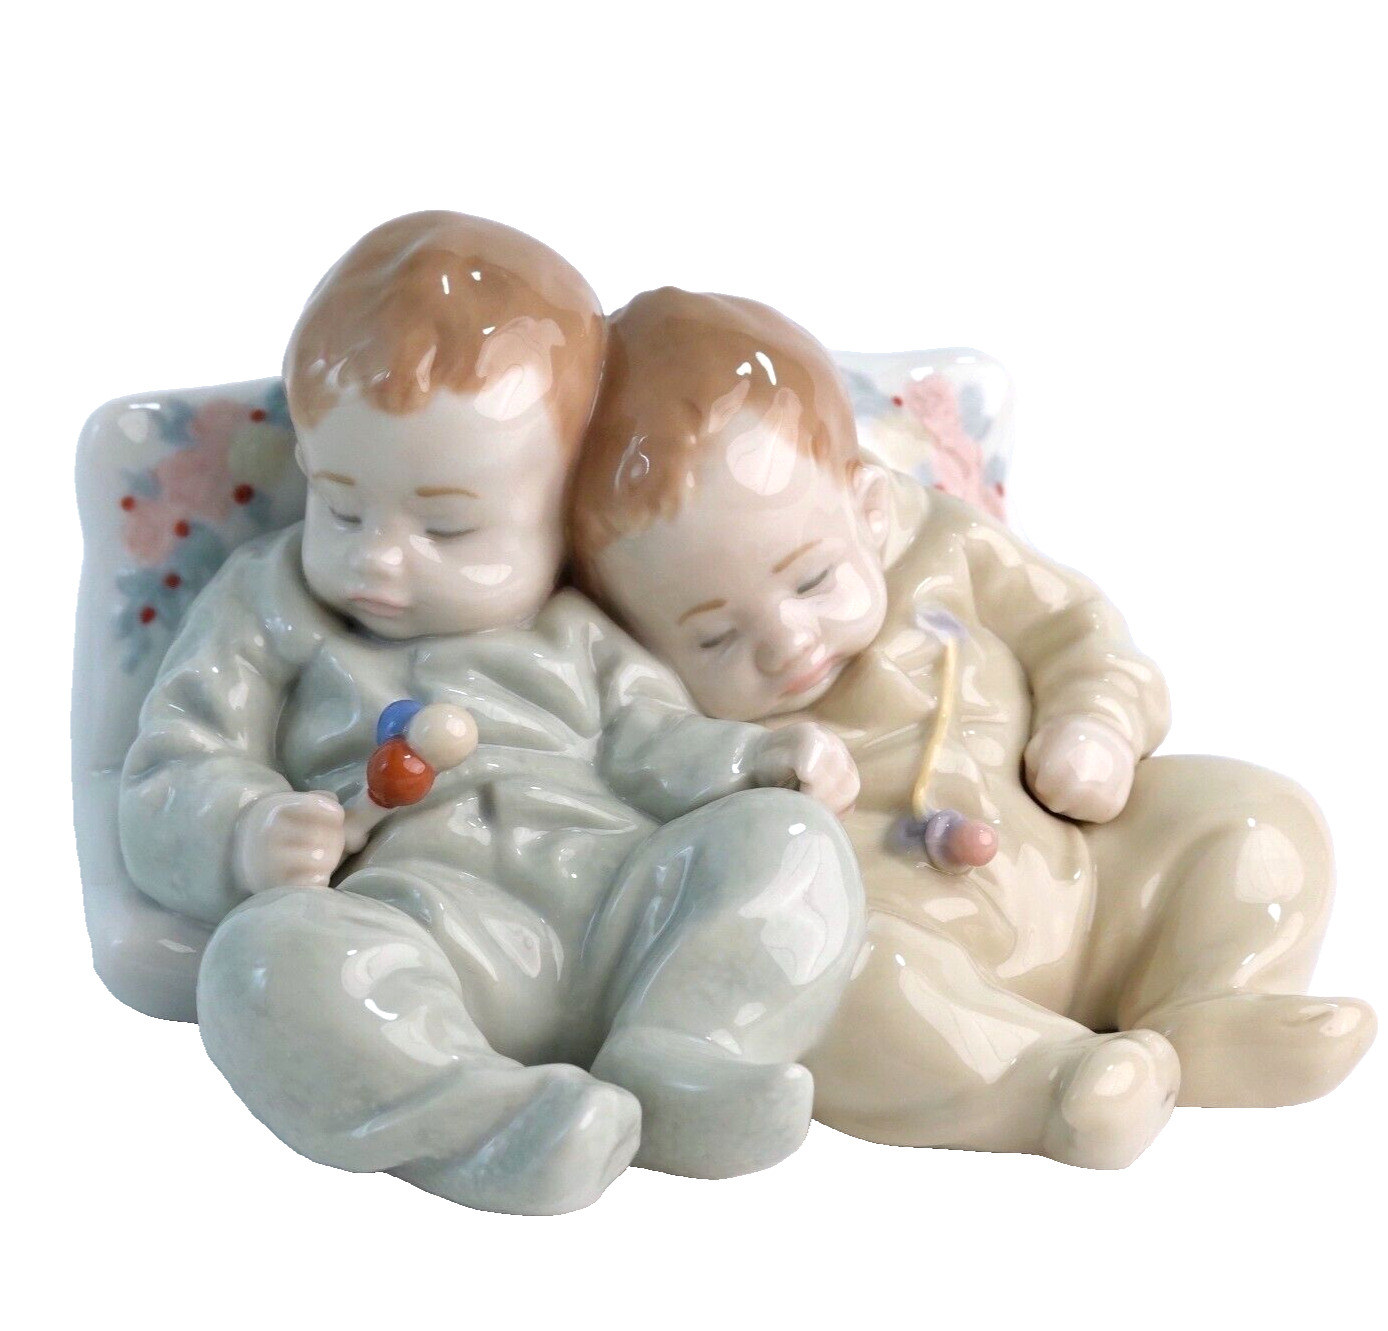 Lladro Retired Figurine Little Dreamers #5772 Babies Sleeping - With Box